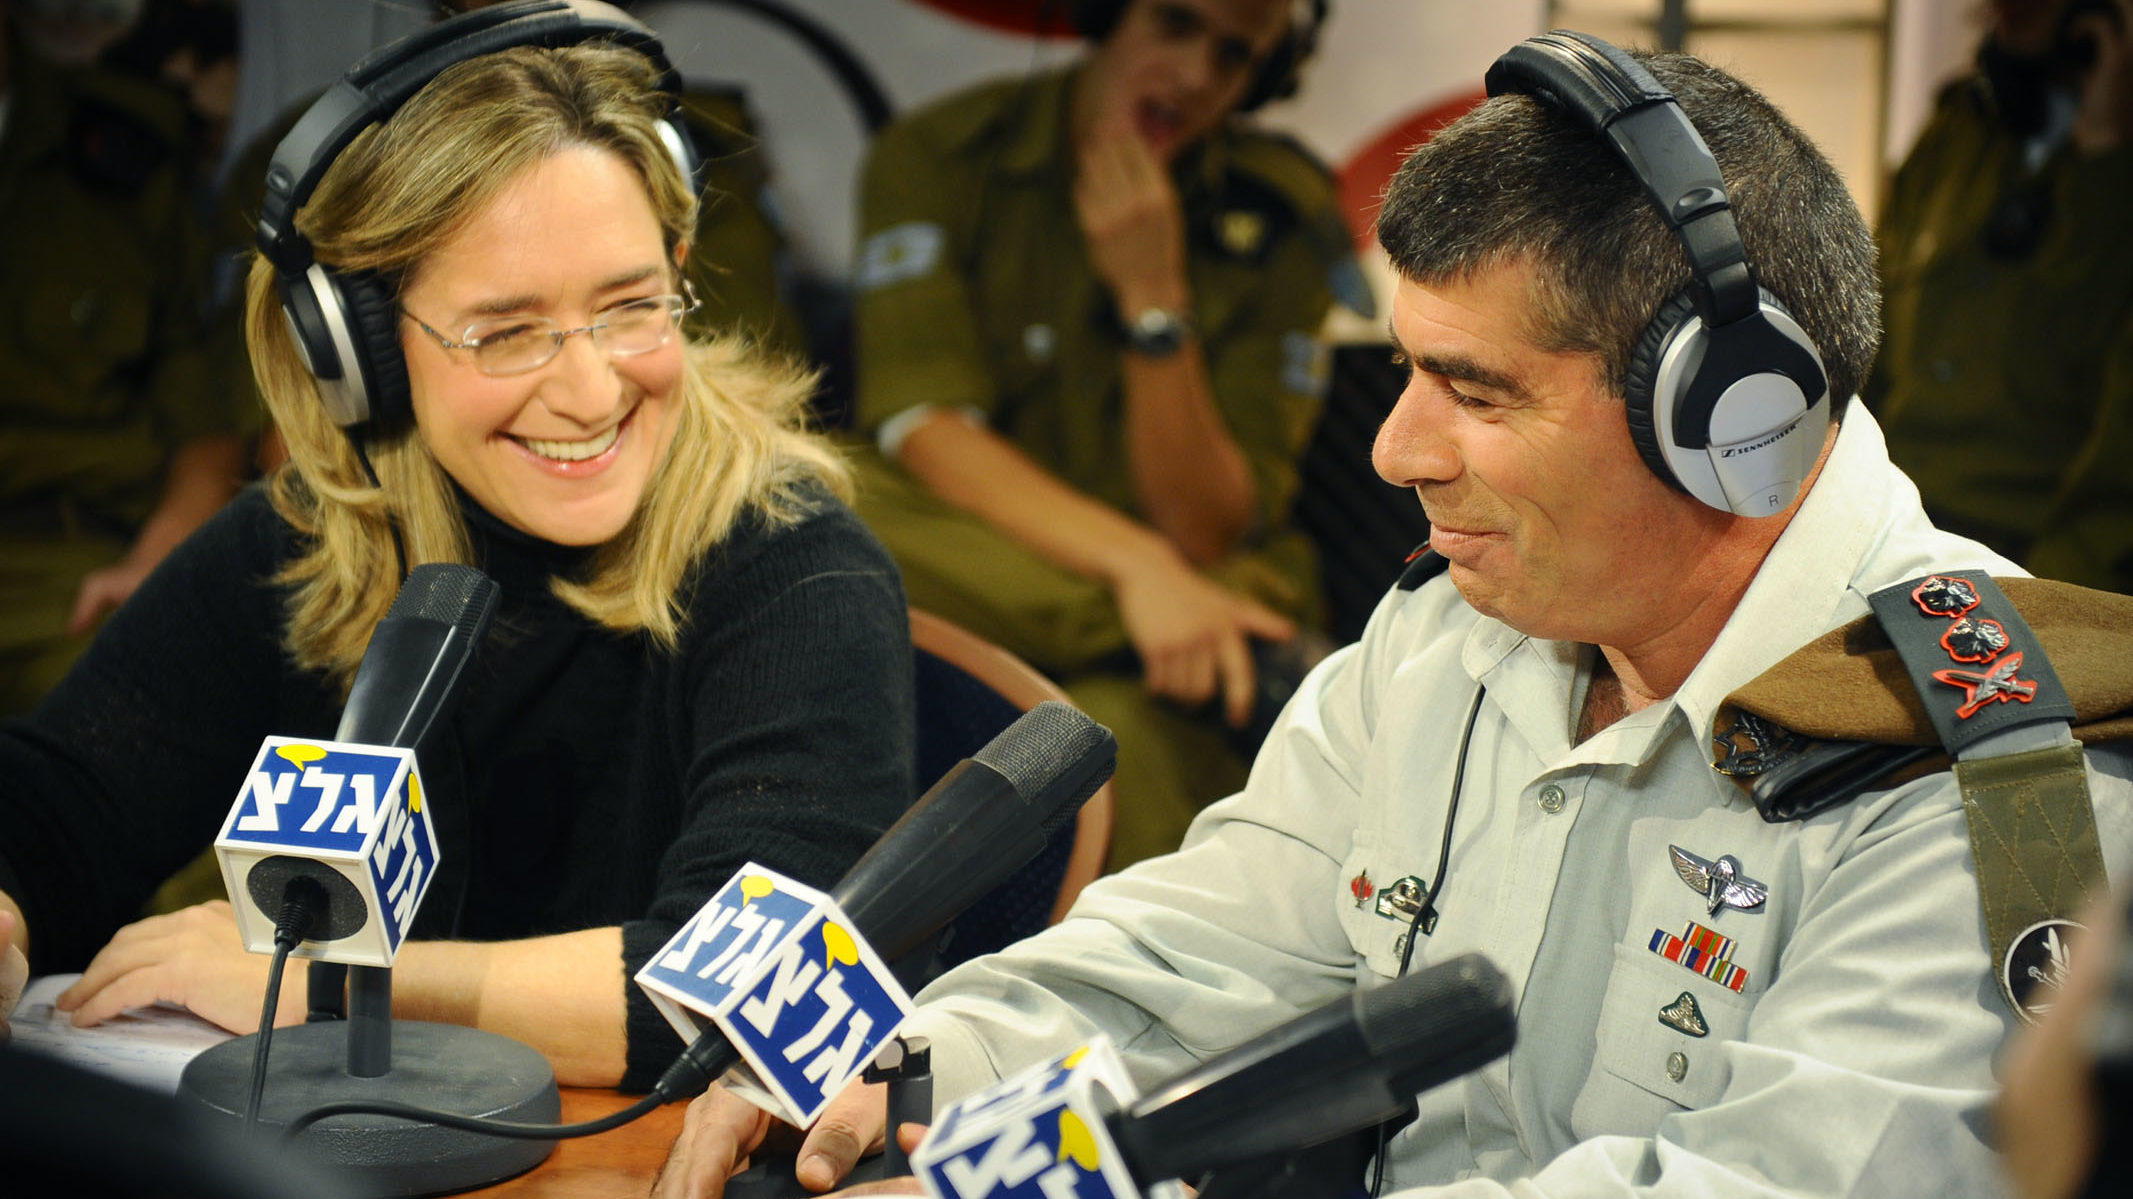 Former Israeli Army Radio Head Says Station Is Irrelevant, Should Be Shuttered